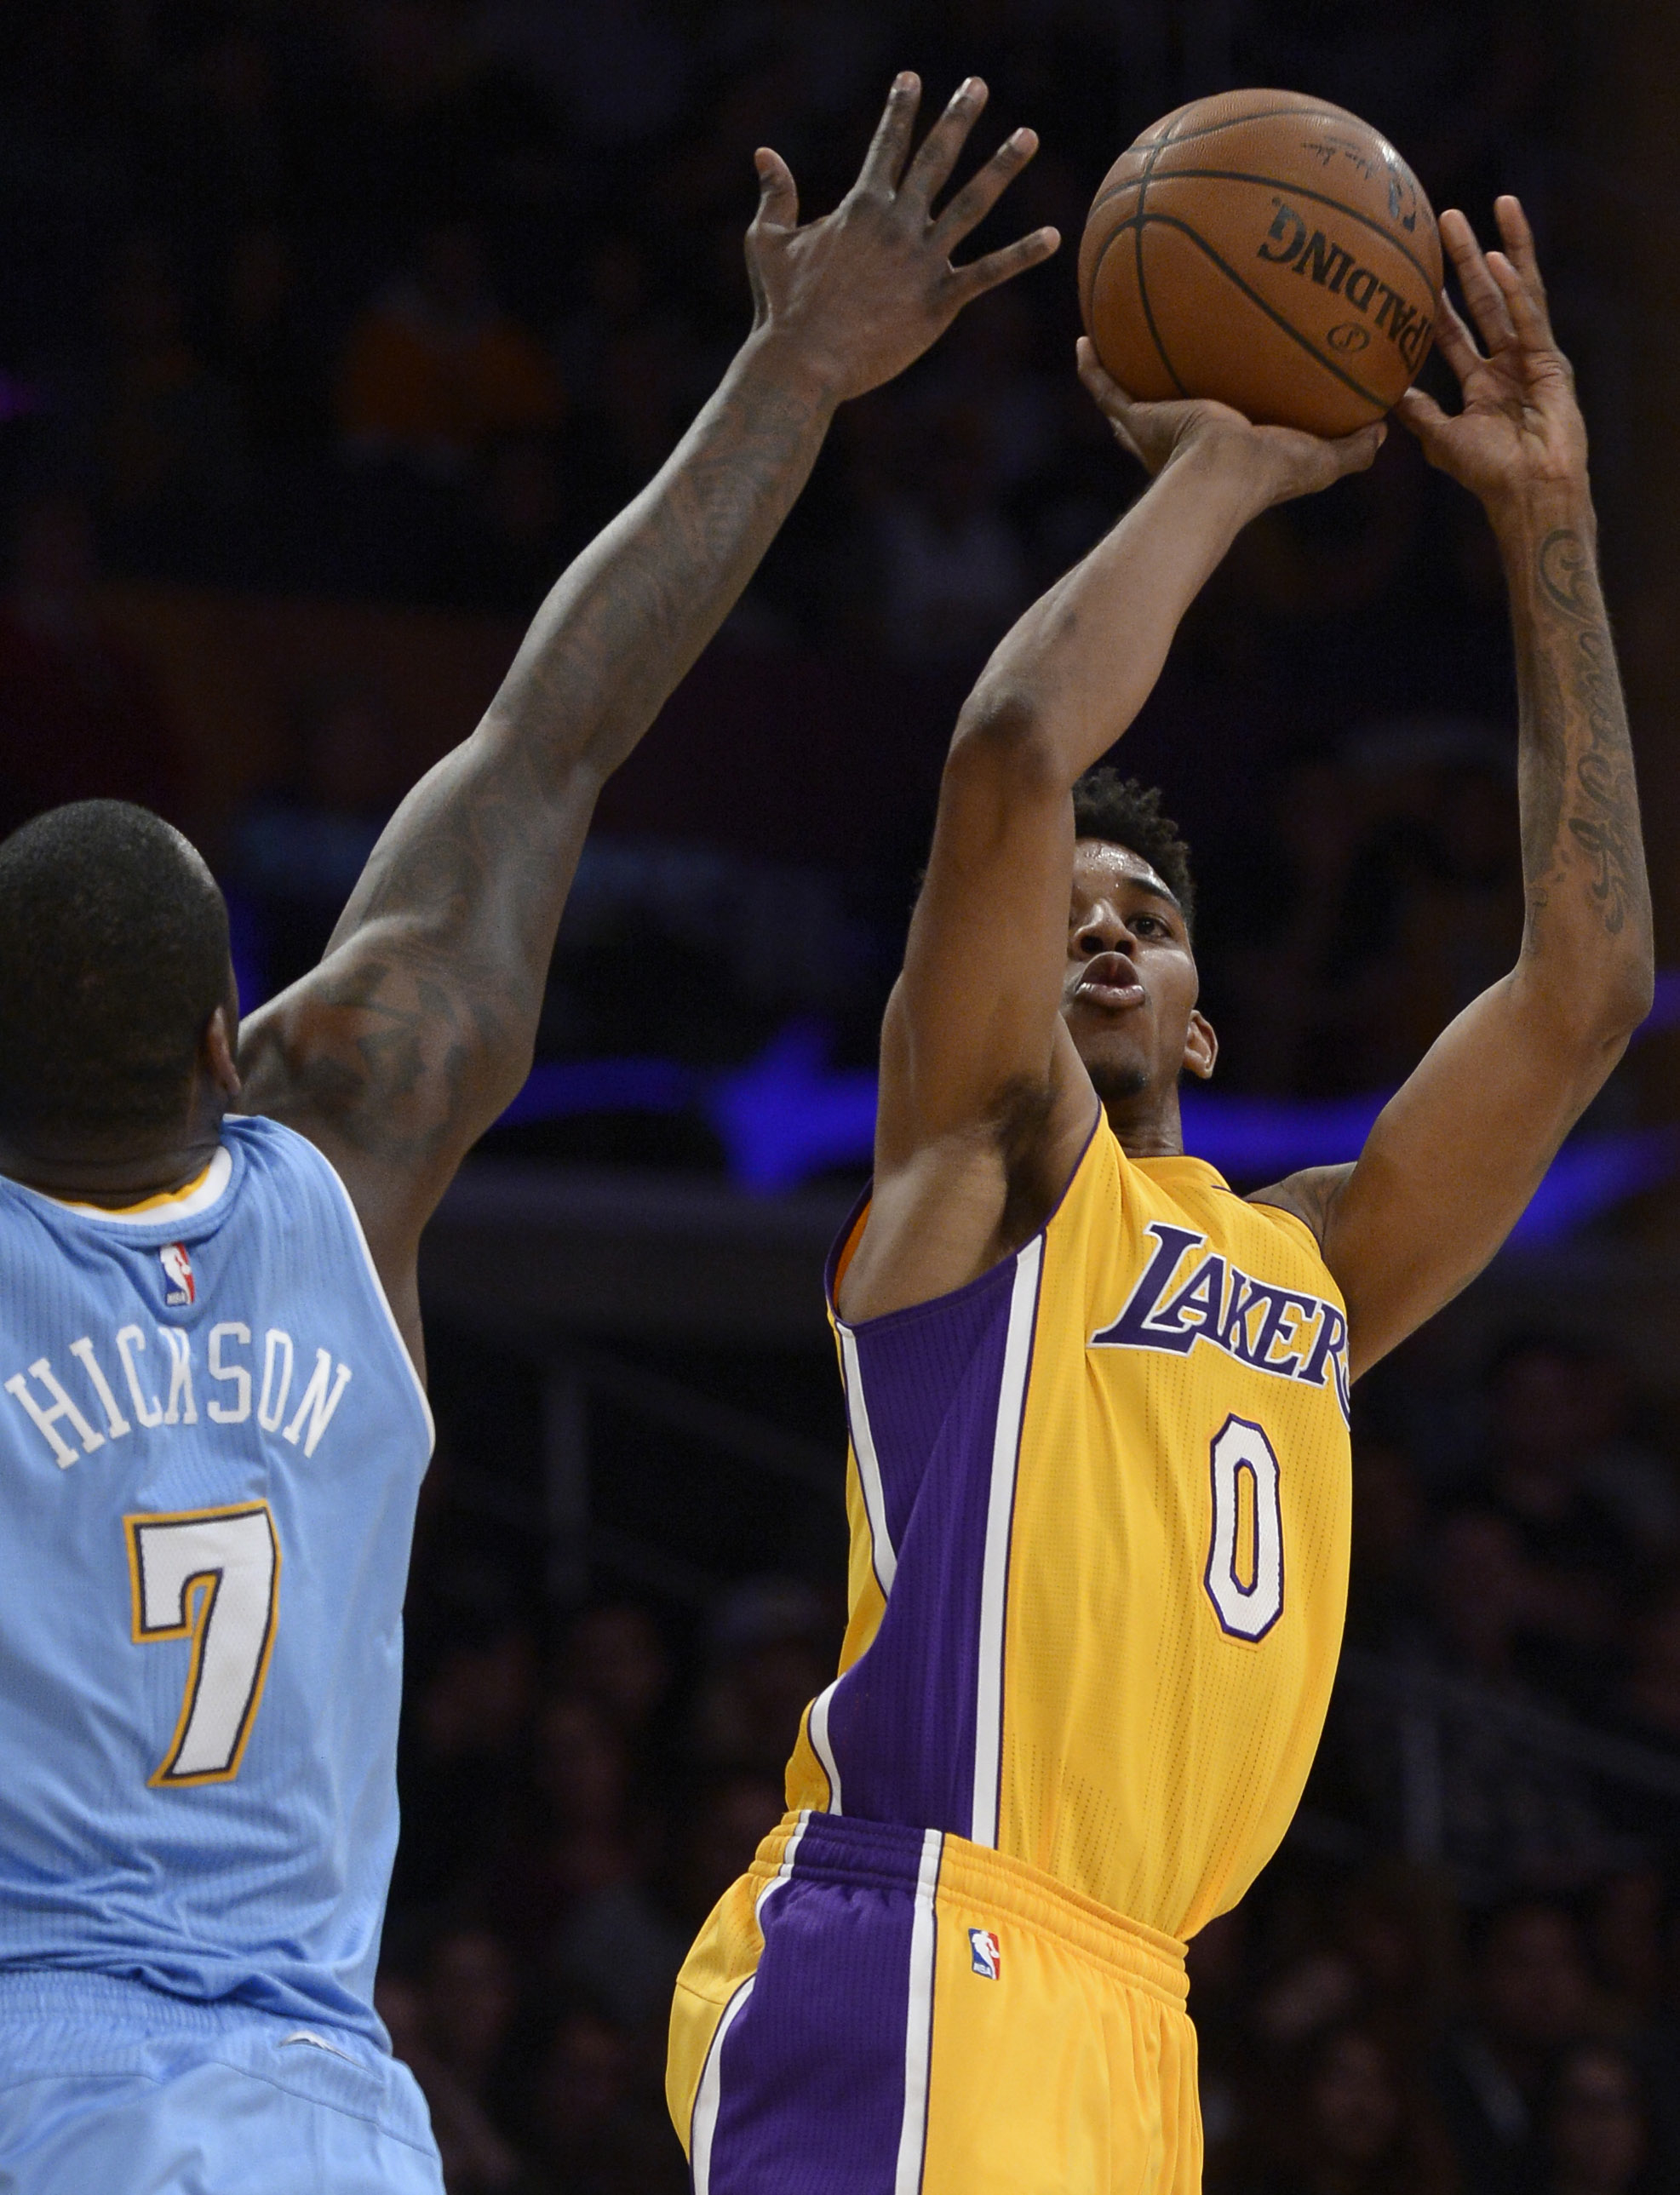 Lakers#0 Nick Young shoots over Nuggets#7 J.J. Hickson in the 4th quarter. The Denver Nuggets defeated the Los Angeles Lakers 106-96 at Staples Center in Los Angeles, CA February 10, 2015.  (Photos by John McCoy / Los Angeles Daily News)